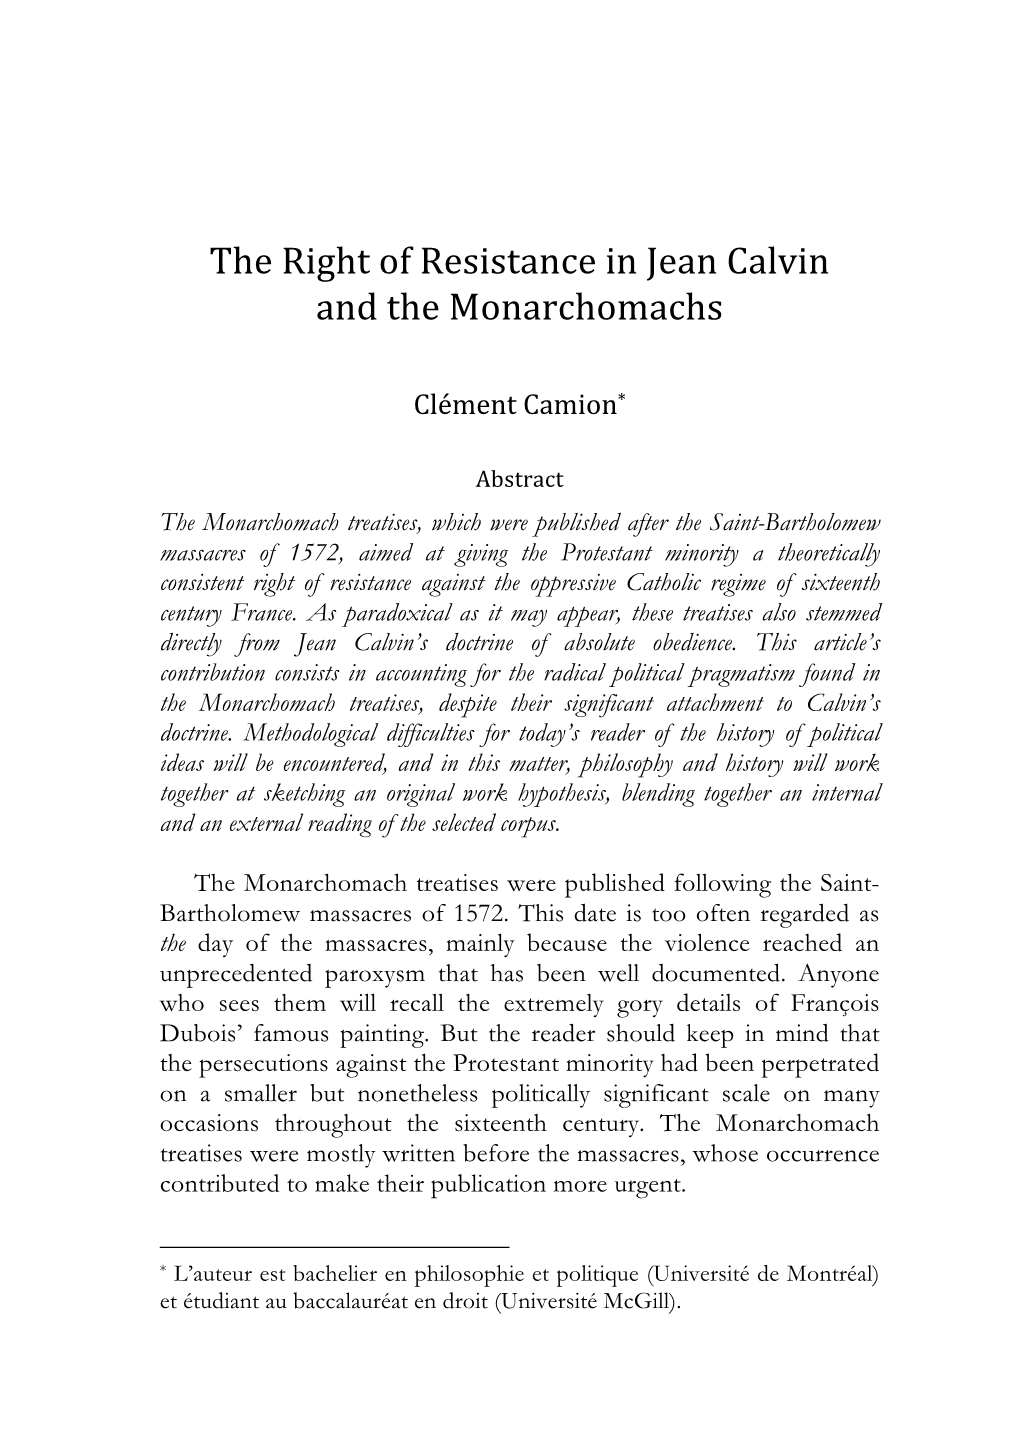 The Right of Resistance in Jean Calvin and the Monarchomachs